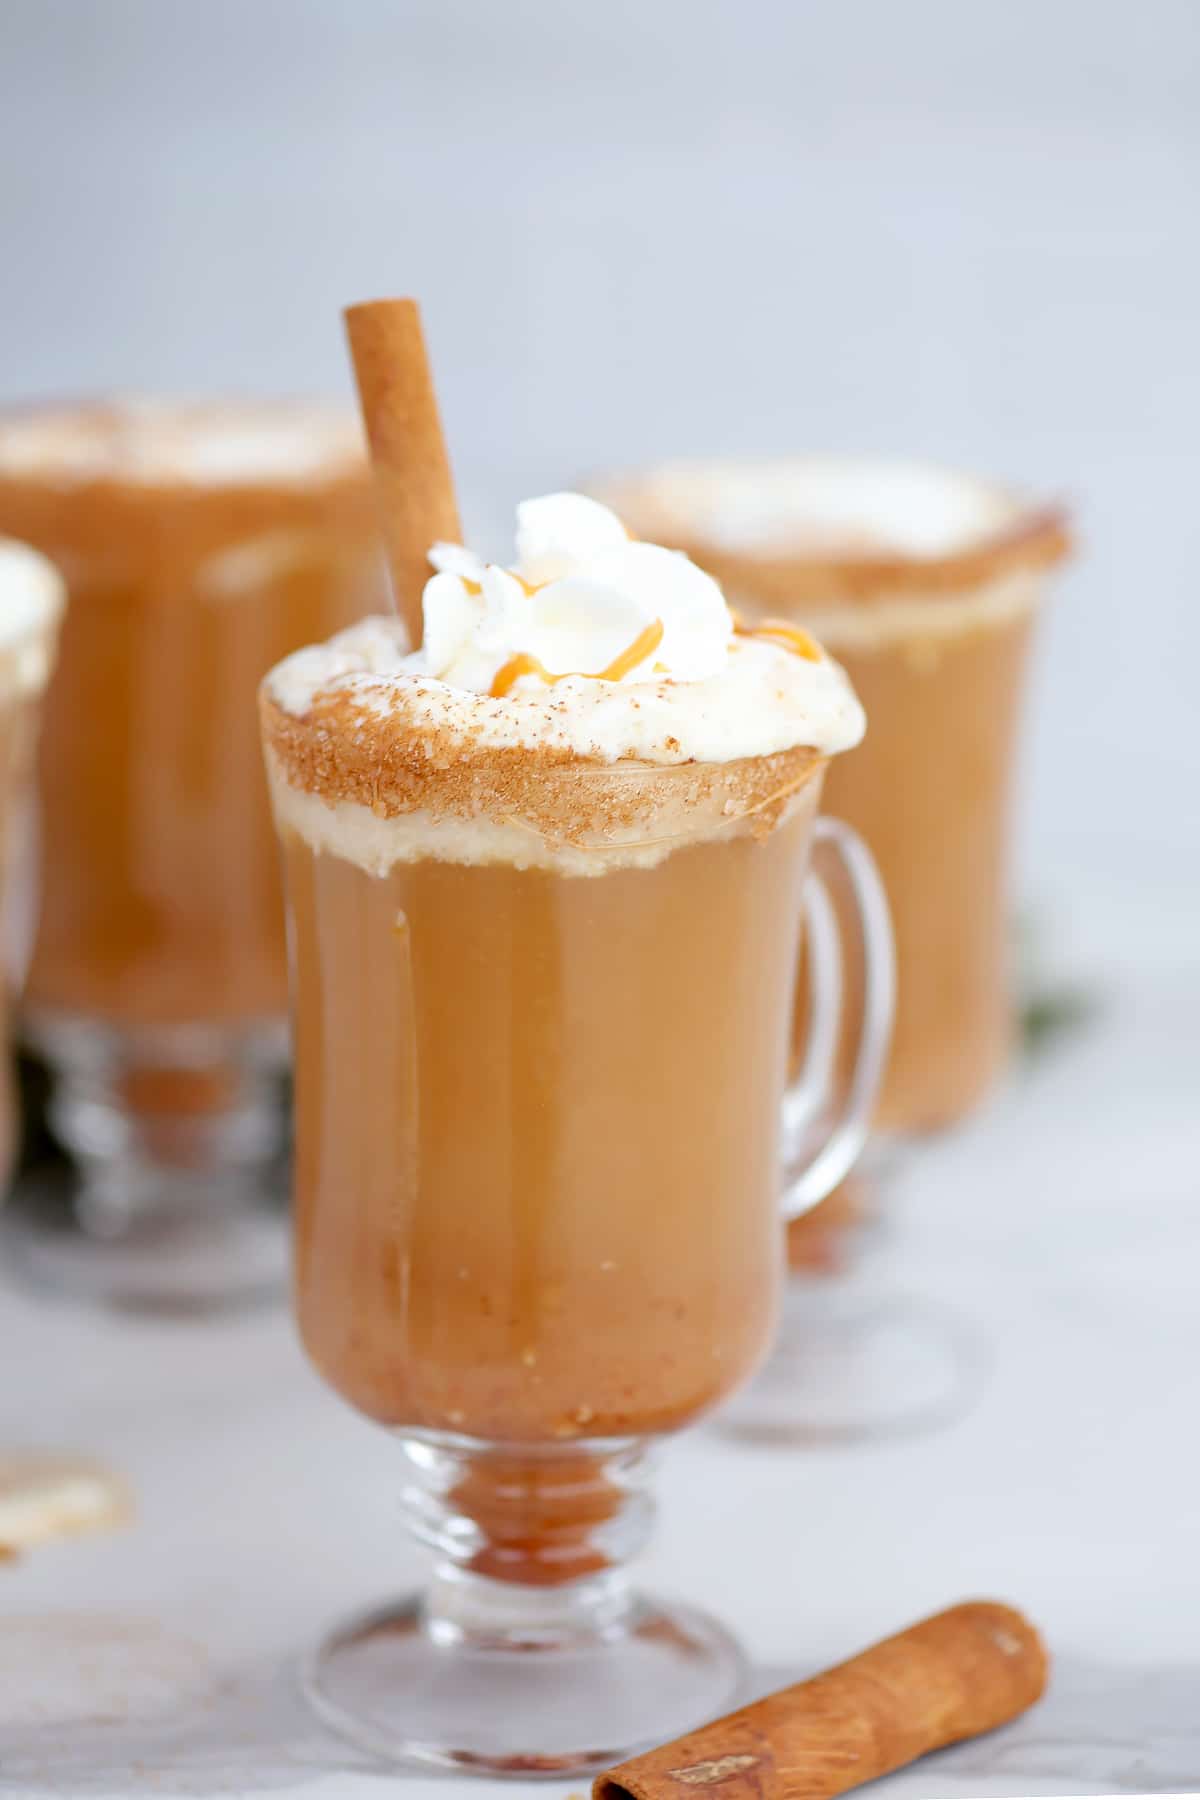 A glass mug filled with caramel apple cider, topped with whipped cream, a caramel drizzle, and a cinnamon stick.